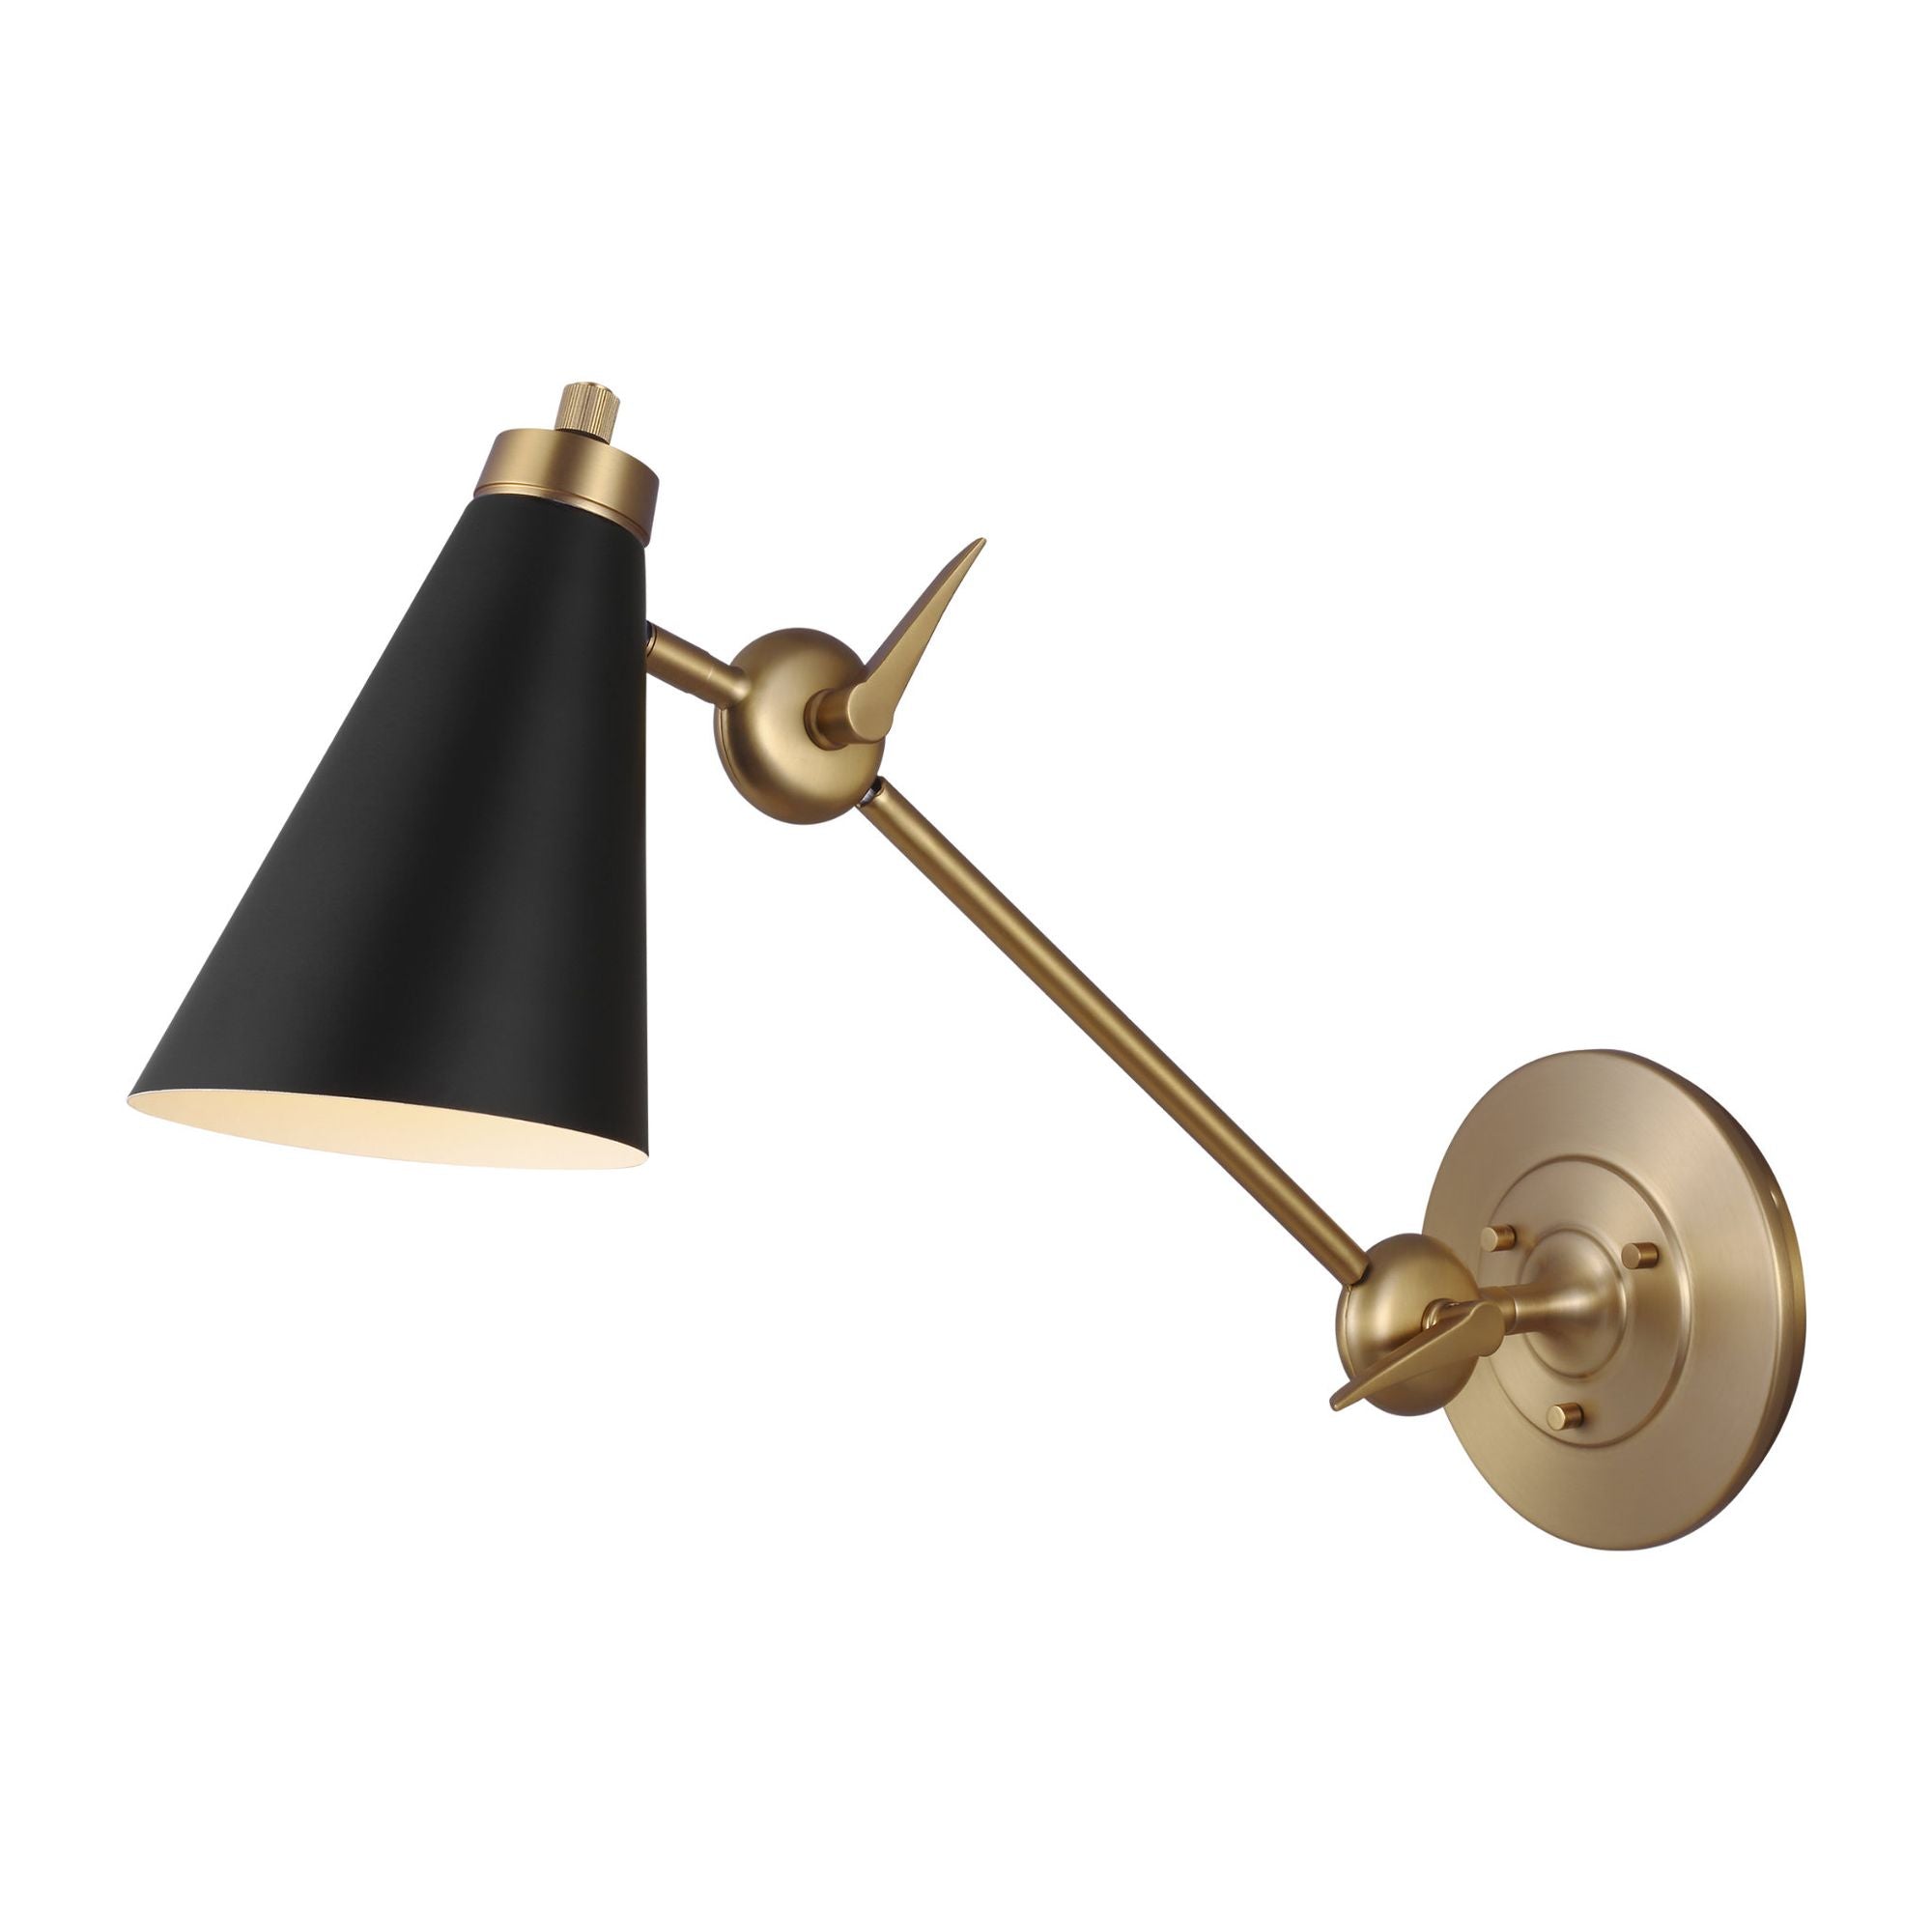 Thomas O'Brien Signoret Library Sconce in Burnished Brass